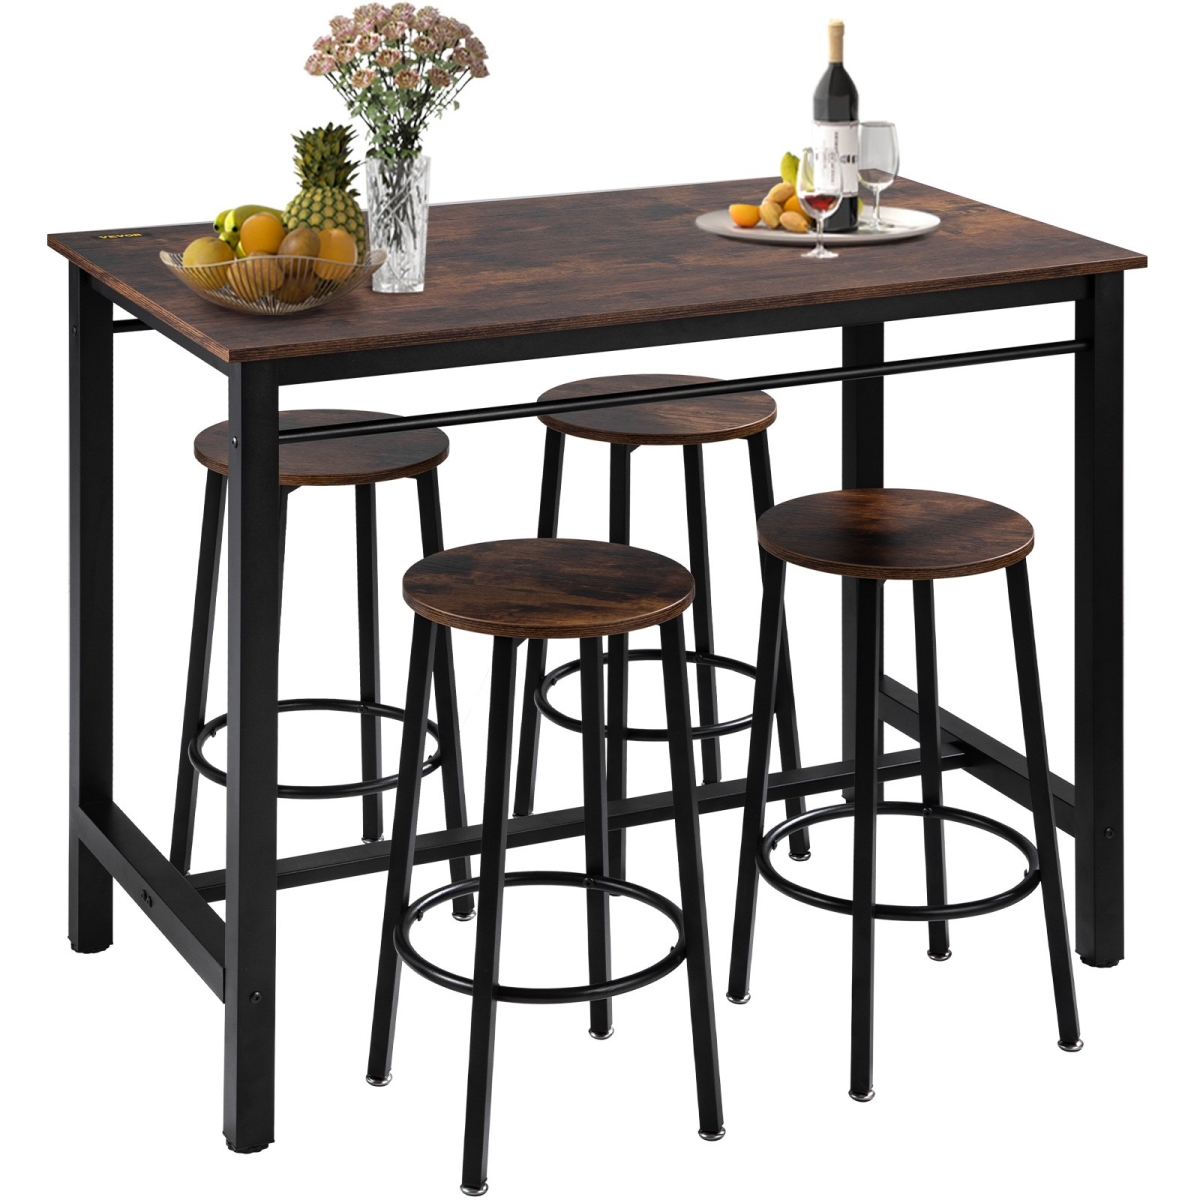 Picture of Vevor FZYDTMBTZYJTZGZM8V0 43 in. Pub Table Set with 4 Bar Stools